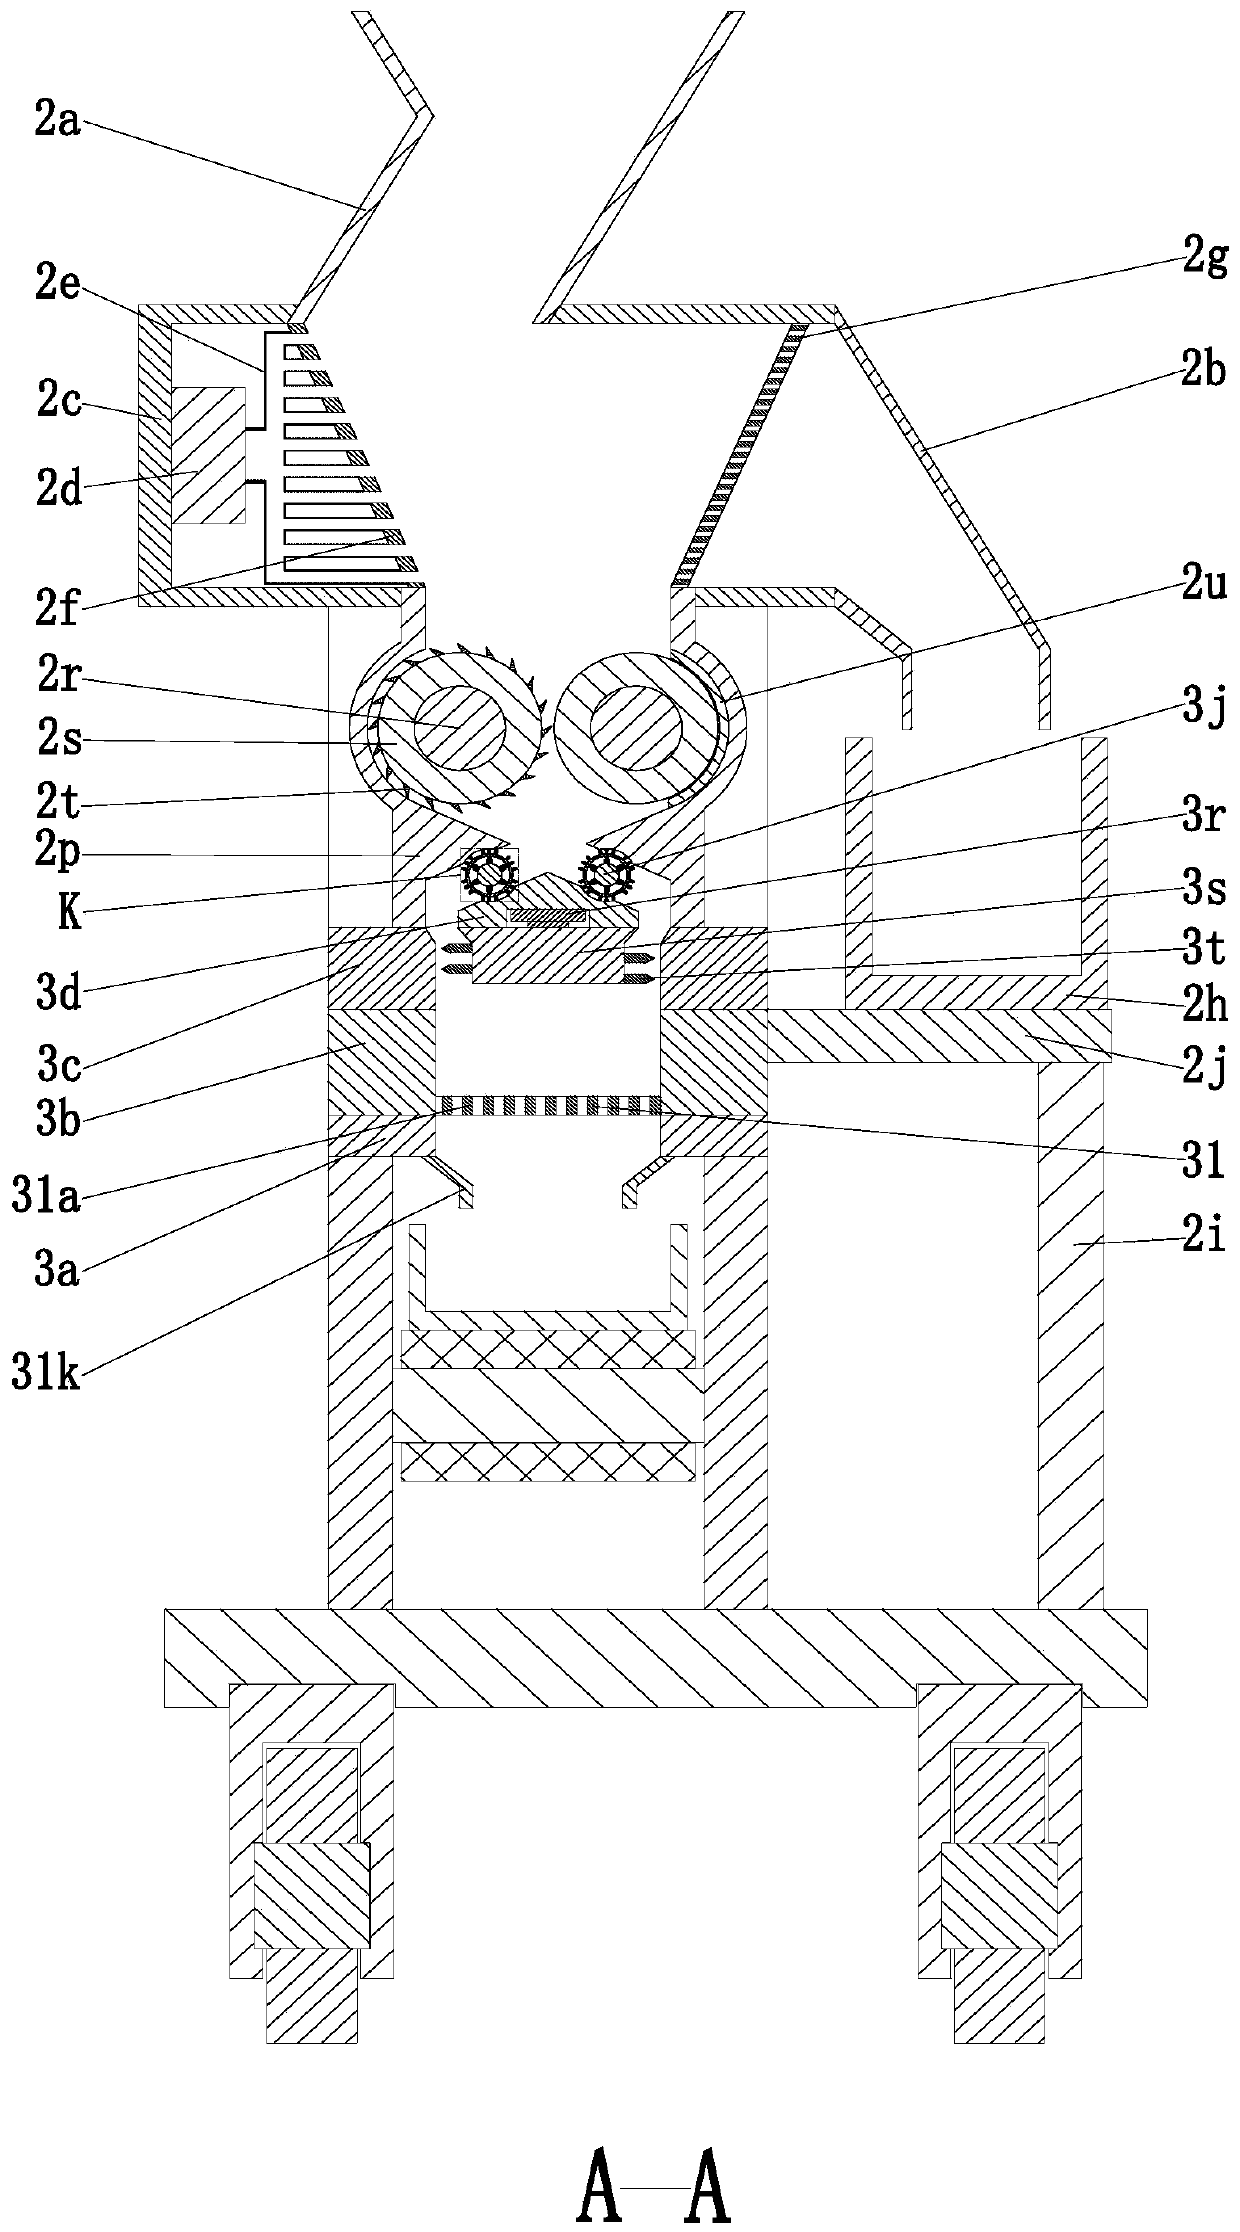 Pretreatment processing system for injection molding raw materials